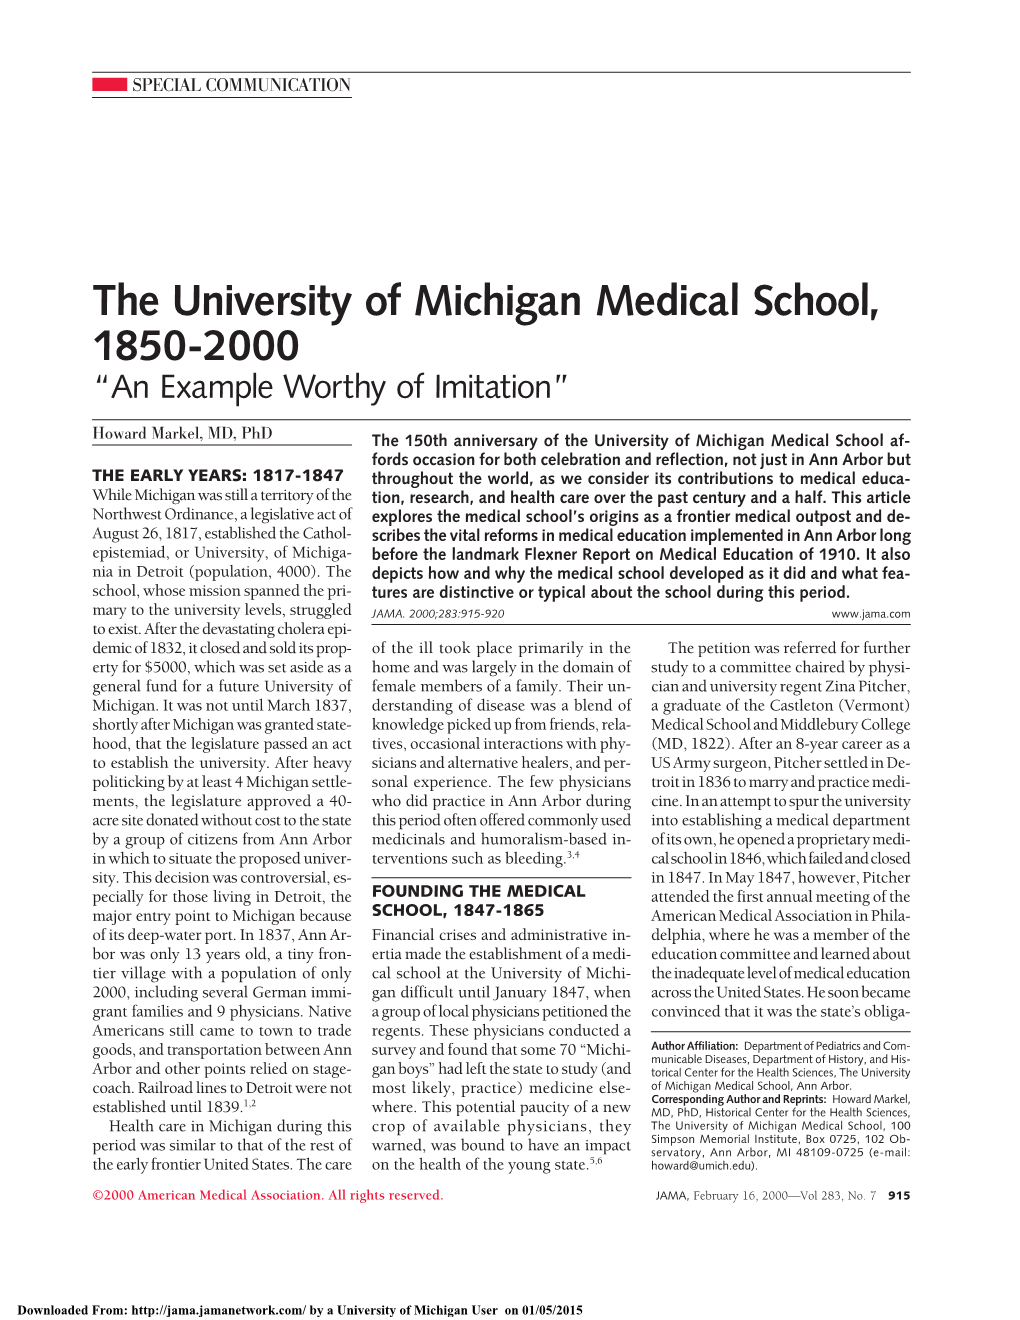 The University of Michigan Medical School, 1850-2000 “An Example Worthy of Imitation”